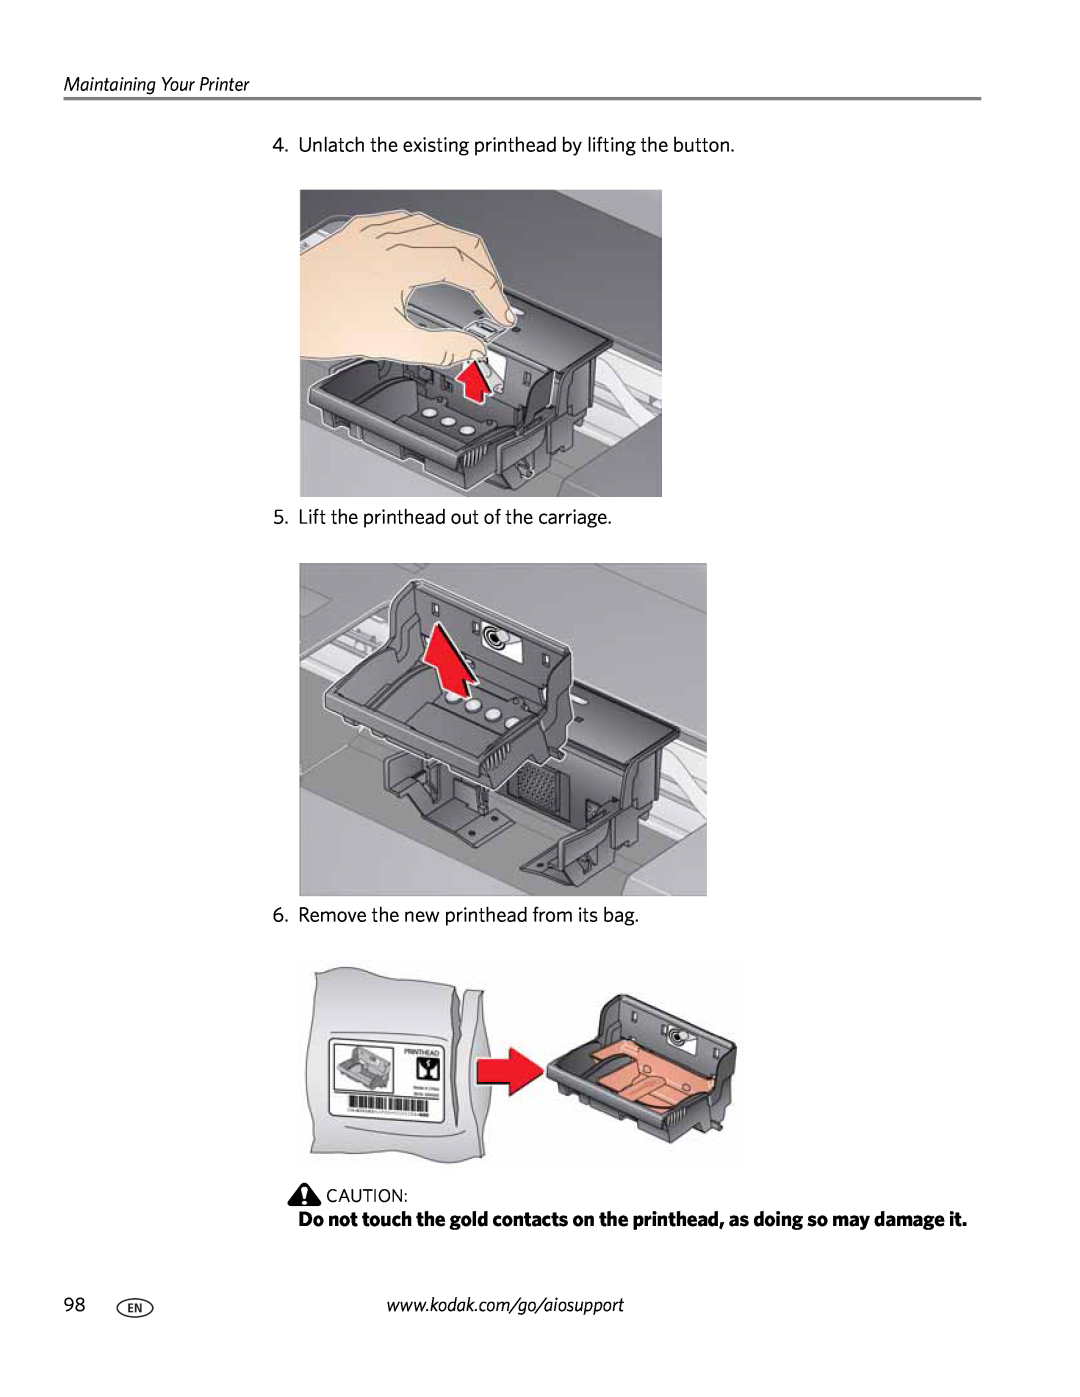 Kodak 7.1 manual Unlatch the existing printhead by lifting the button, Lift the printhead out of the carriage 